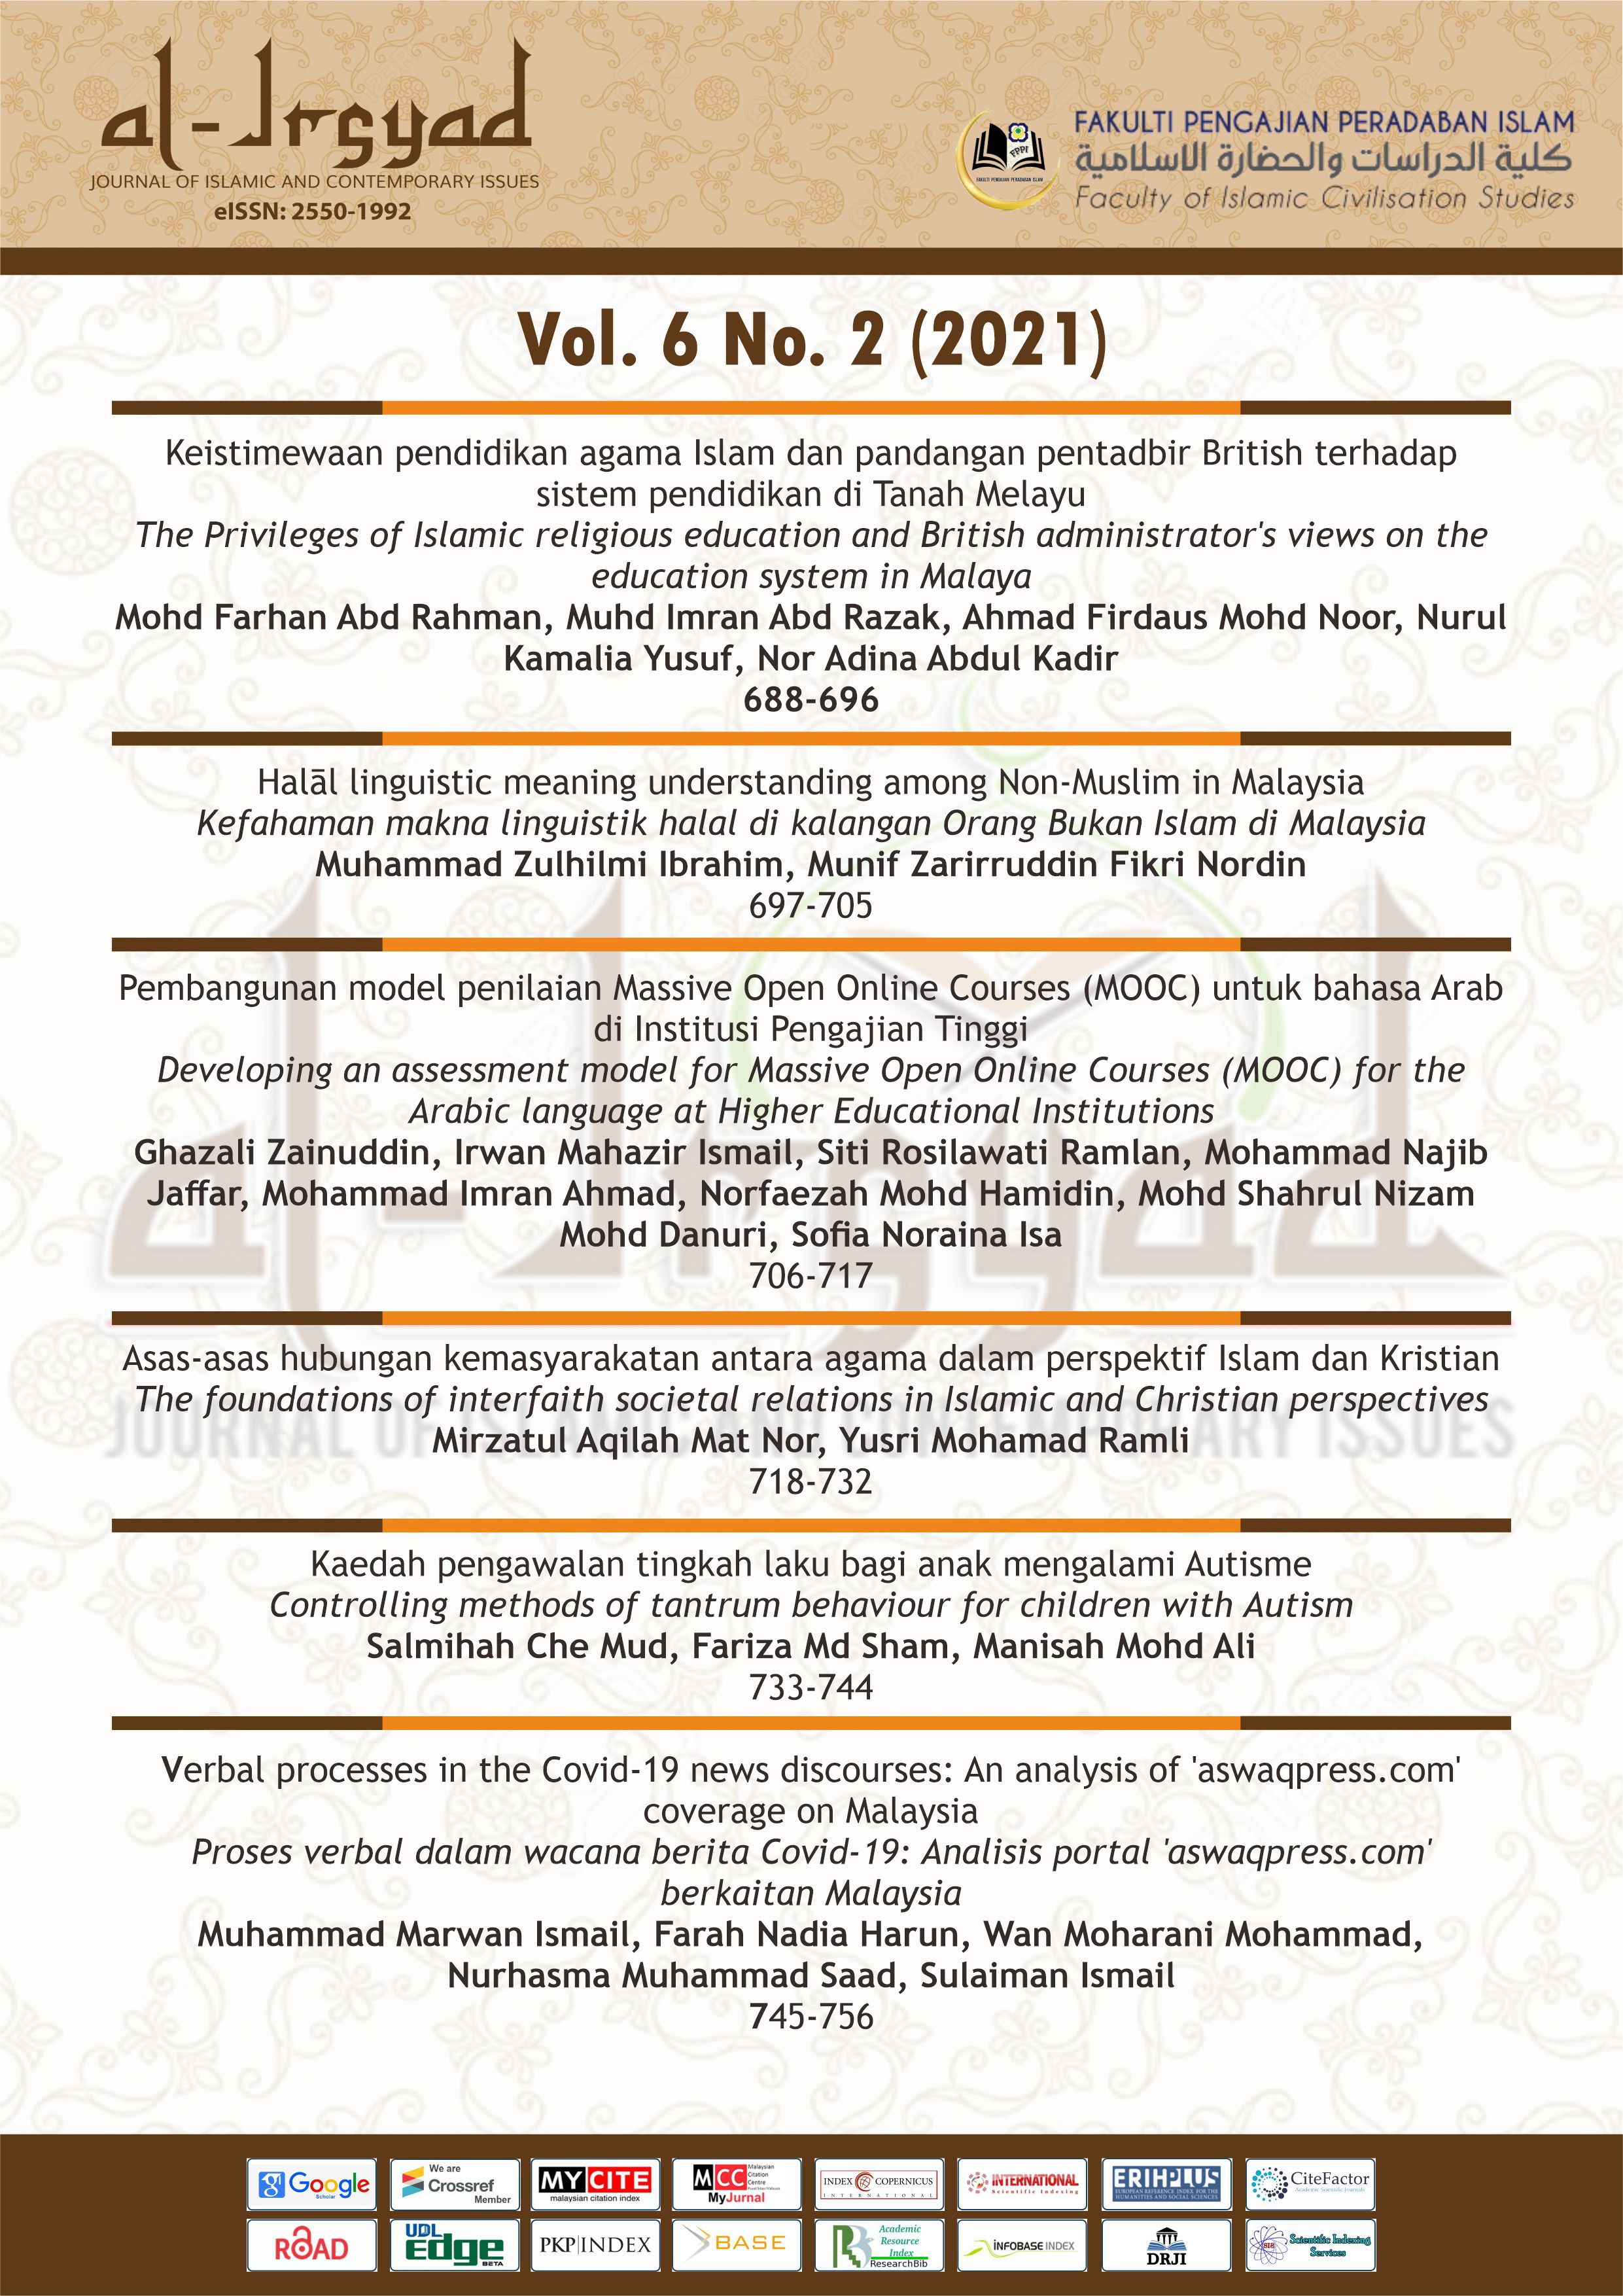 					View Vol. 6 No. 2 (2021): al-Irsyad: Journal of Islamic and Contemporary Issues
				